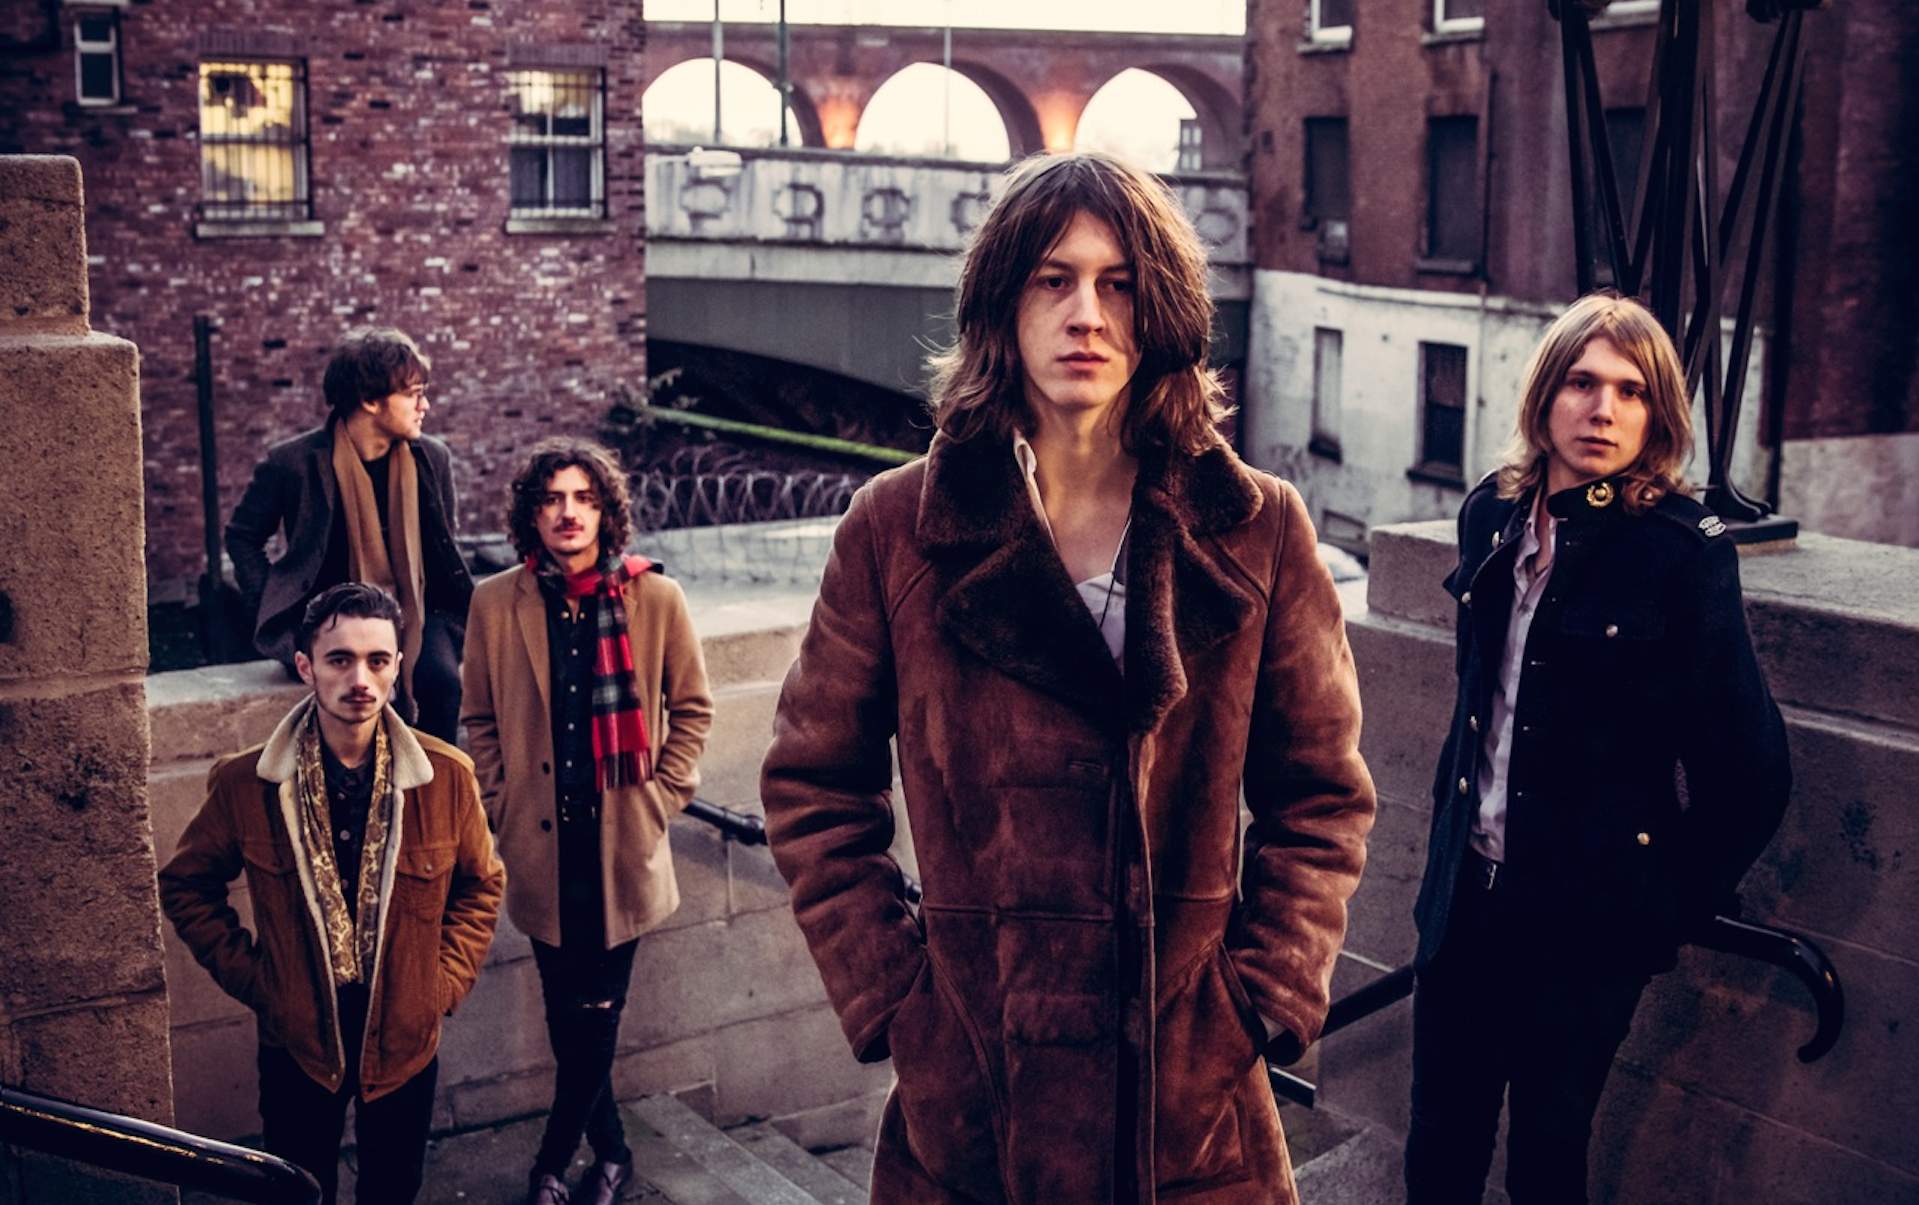 Blossoms announce a North American tour that kicks off at Great Scott